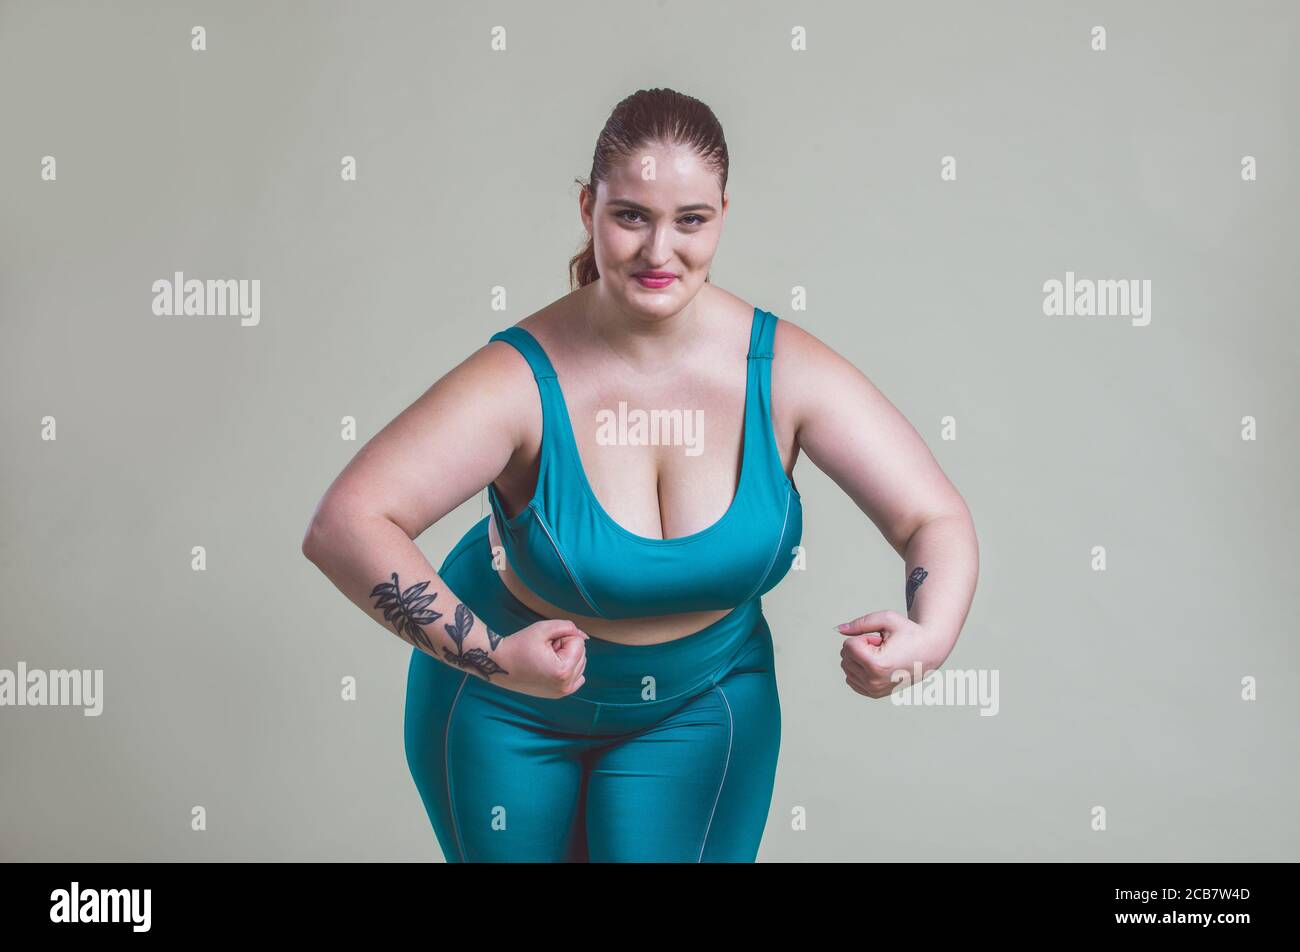 Plus size woman making sport and fitness. Studio portraits with